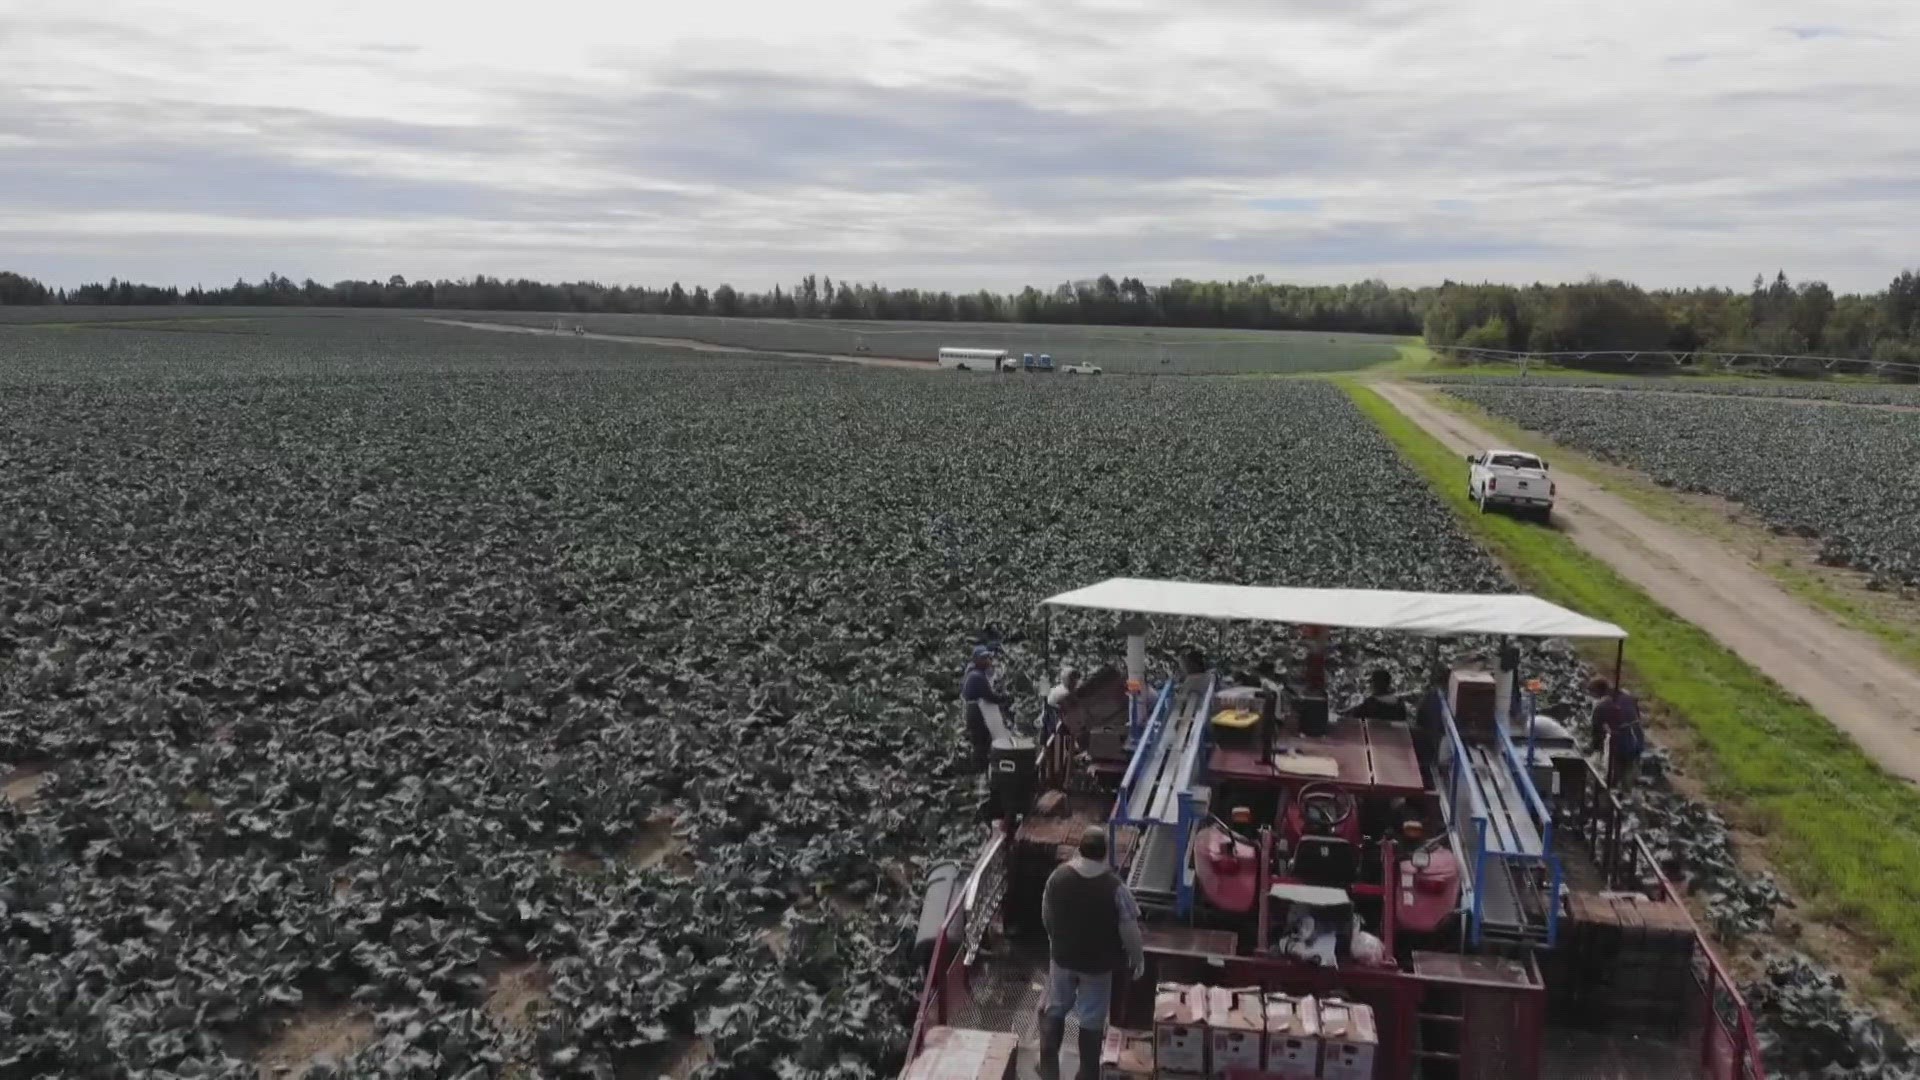 The sixth-generation family farm is the number one exporter of broccoli and cauliflower east of the Mississippi River.